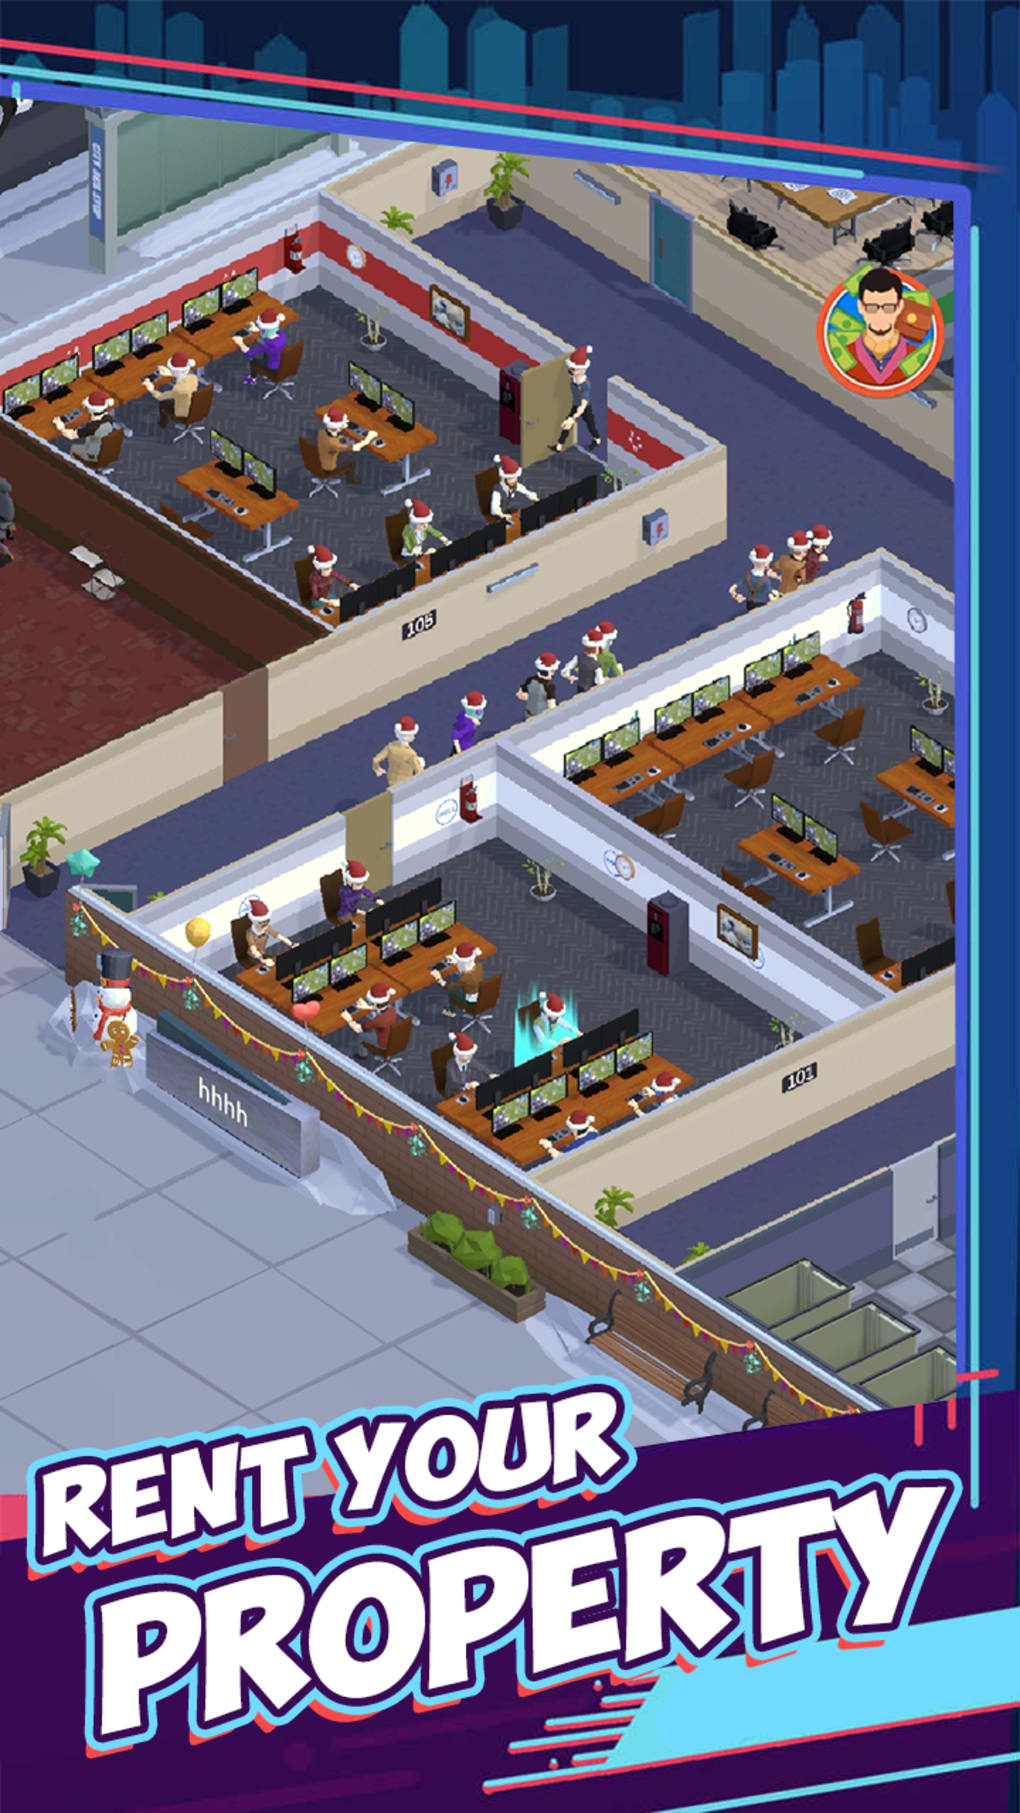 Idle Office Tycoon- Money game - Apps on Google Play